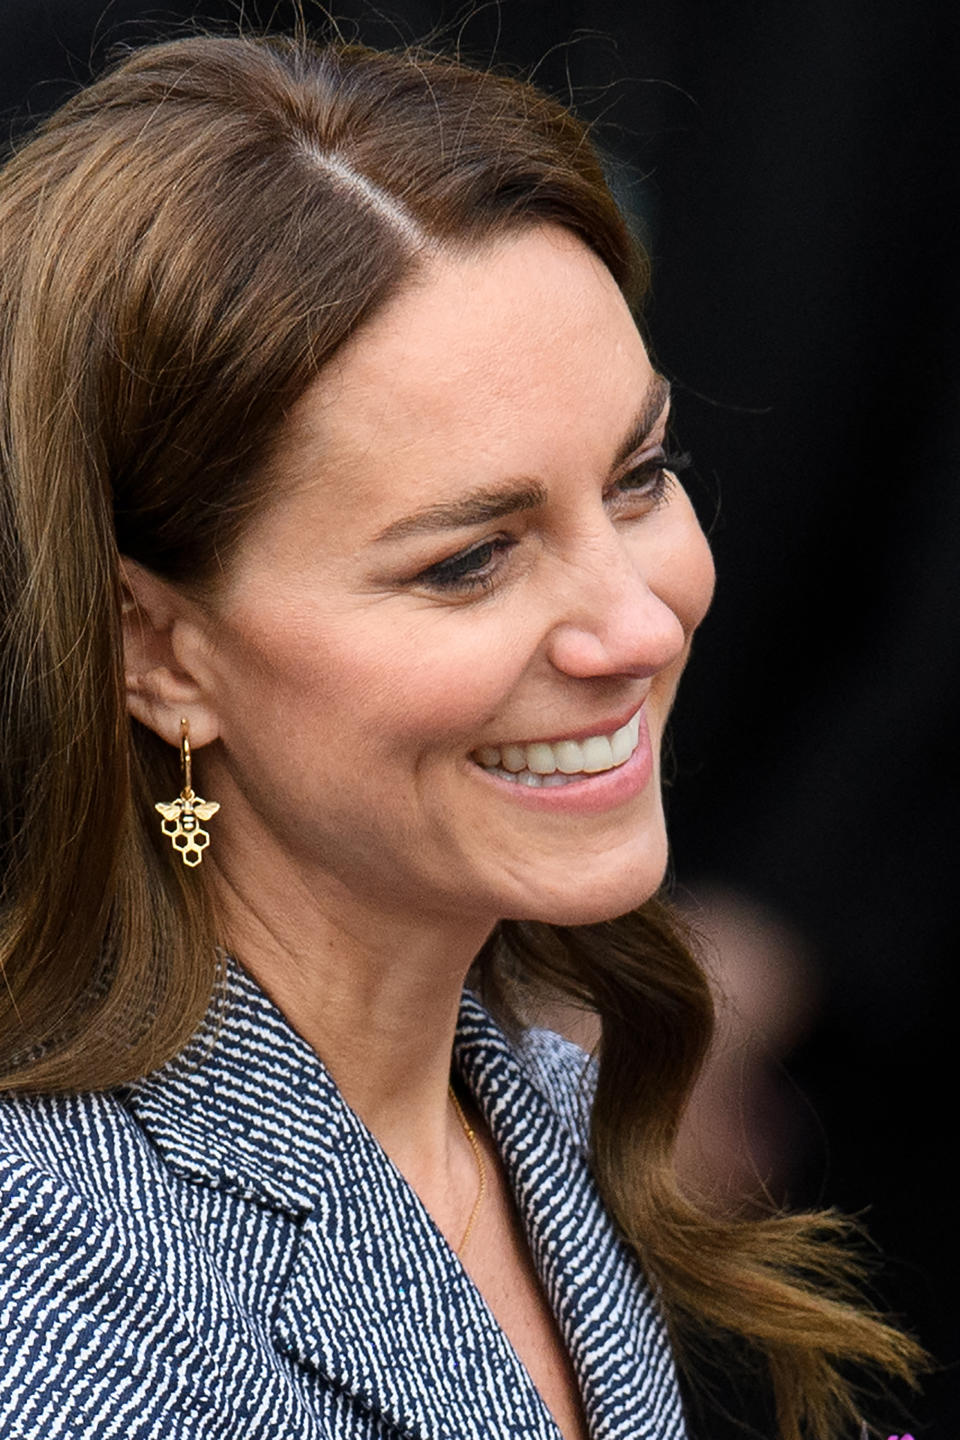 The Duchess of Cambridge wore a bee earring design, which is a symbol of Manchester, as she met with the Manchester Arena victims&#39; families. (Getty Images)